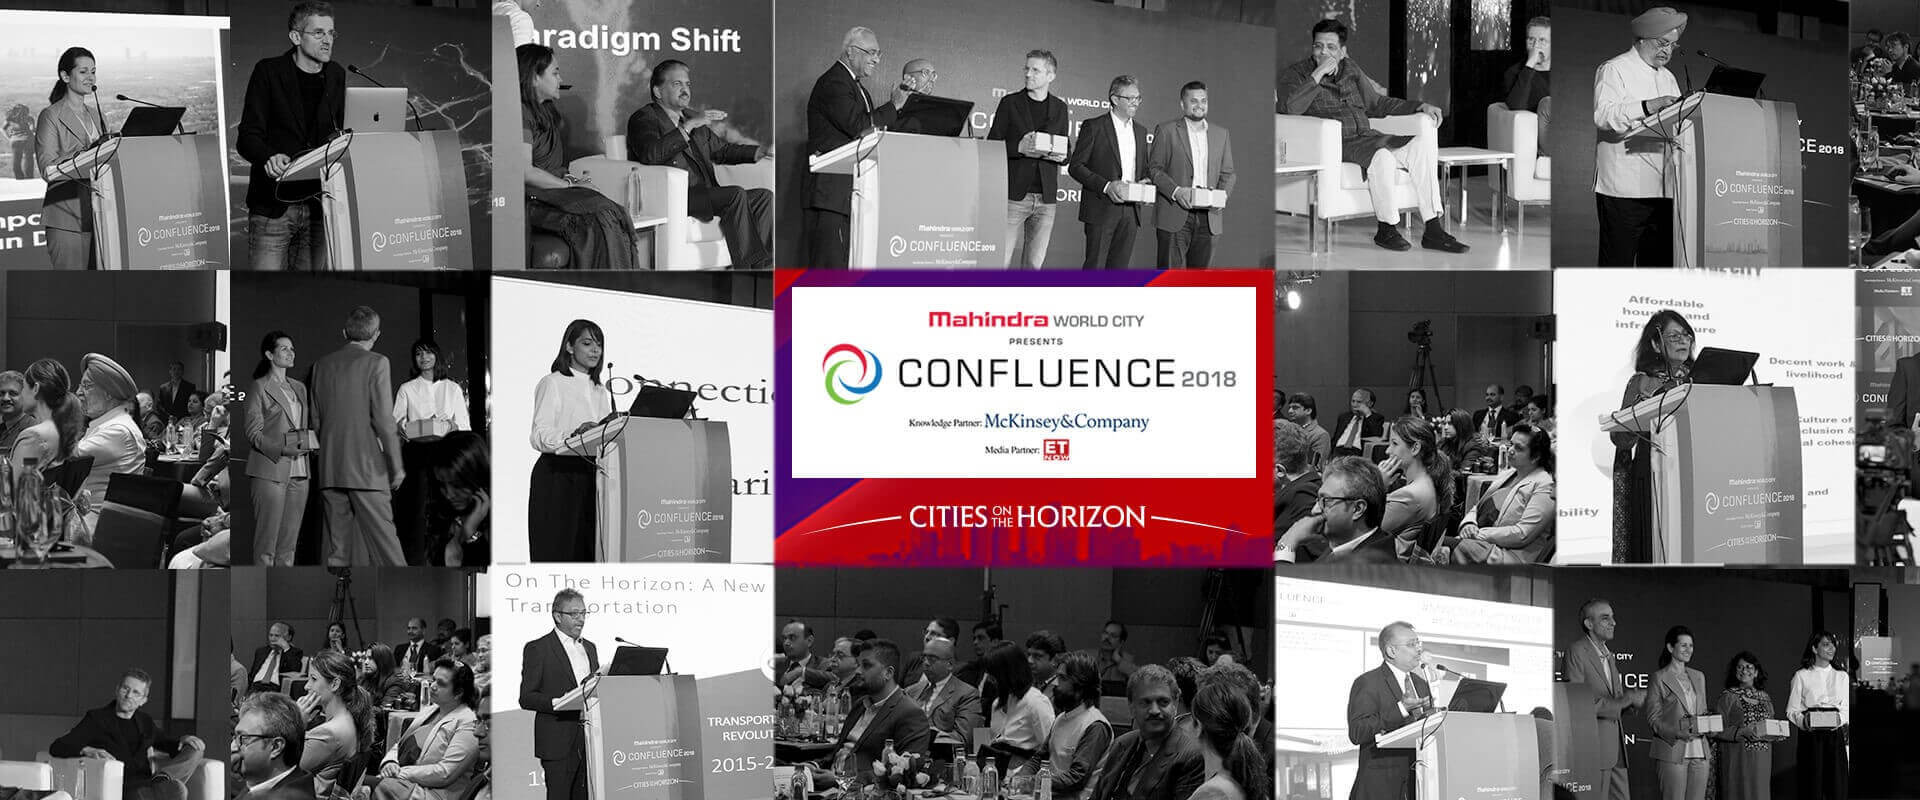 Cities On The Horizon Cities Shaped By Youthfulness New Thinking And Innovation Mwc